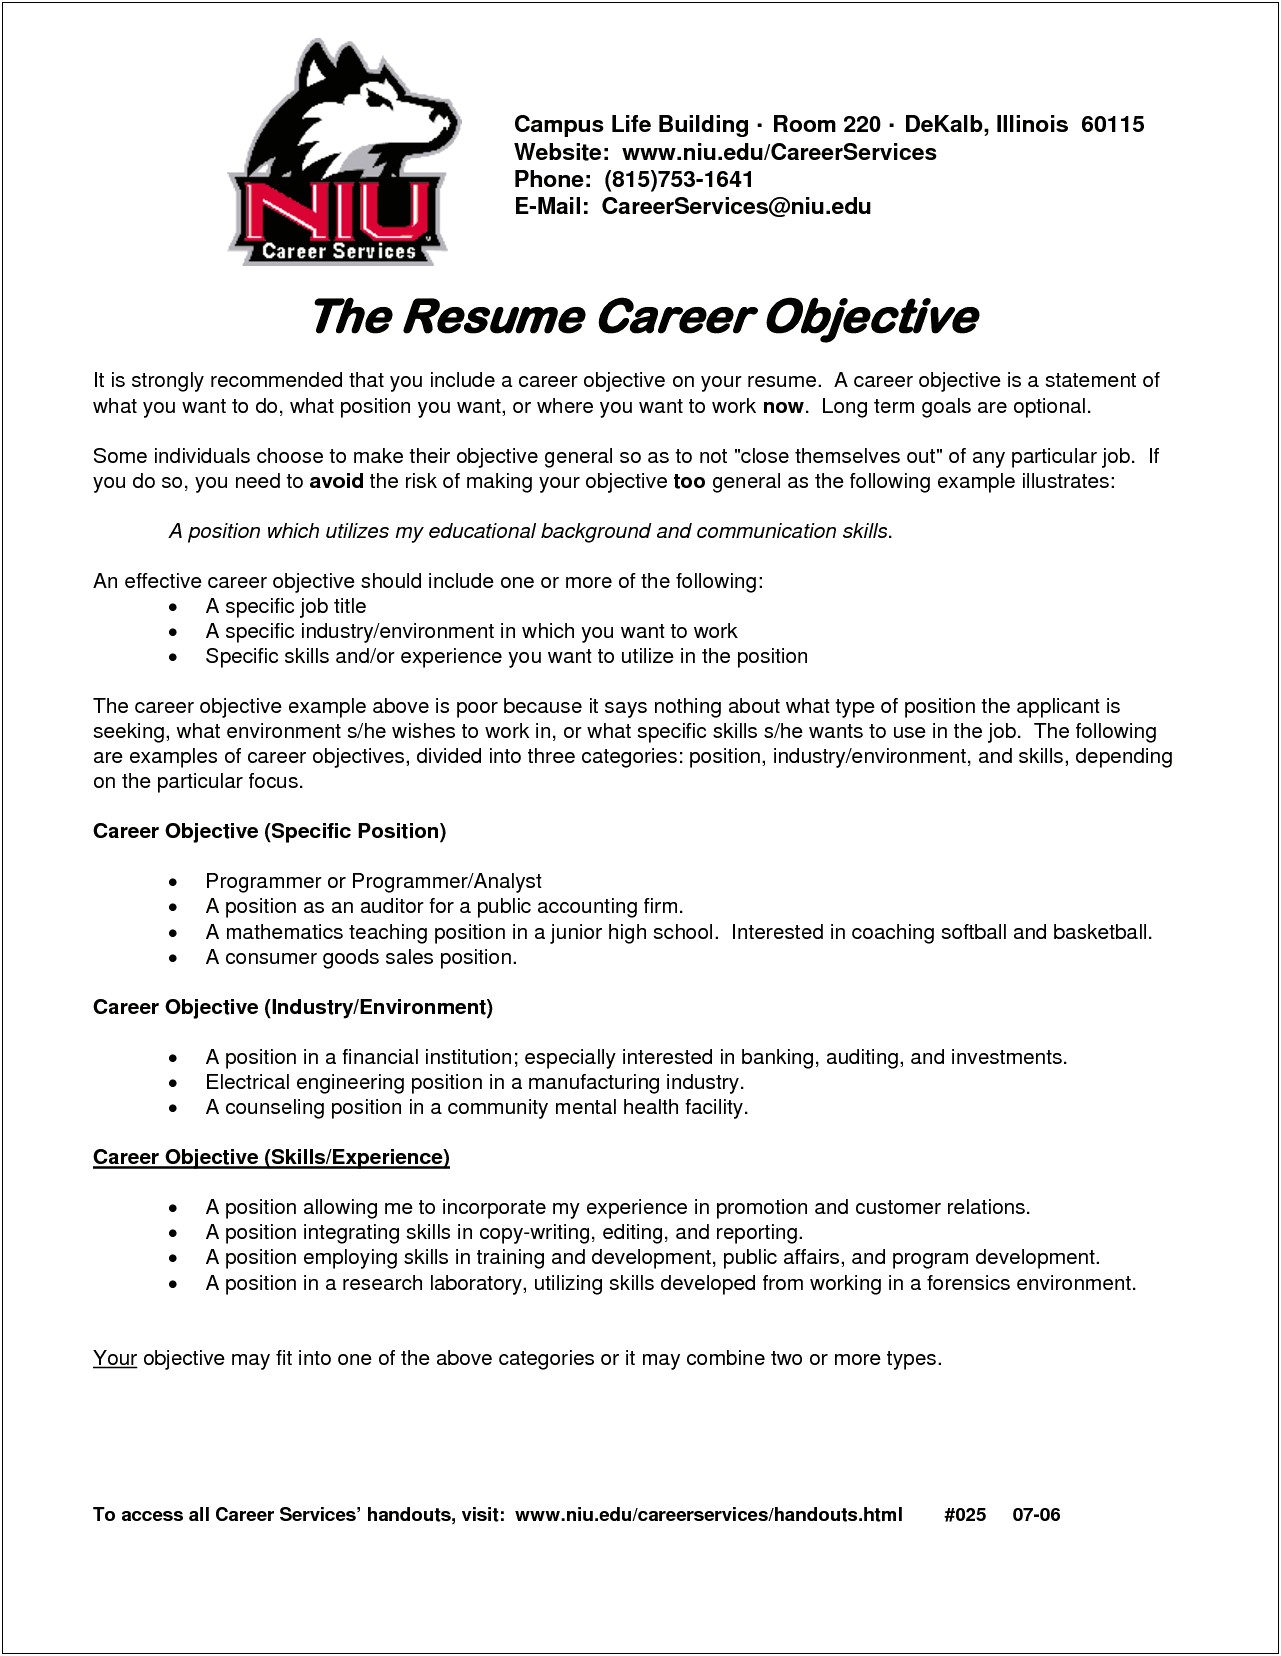 Sample Resume Objective Statement For Banking